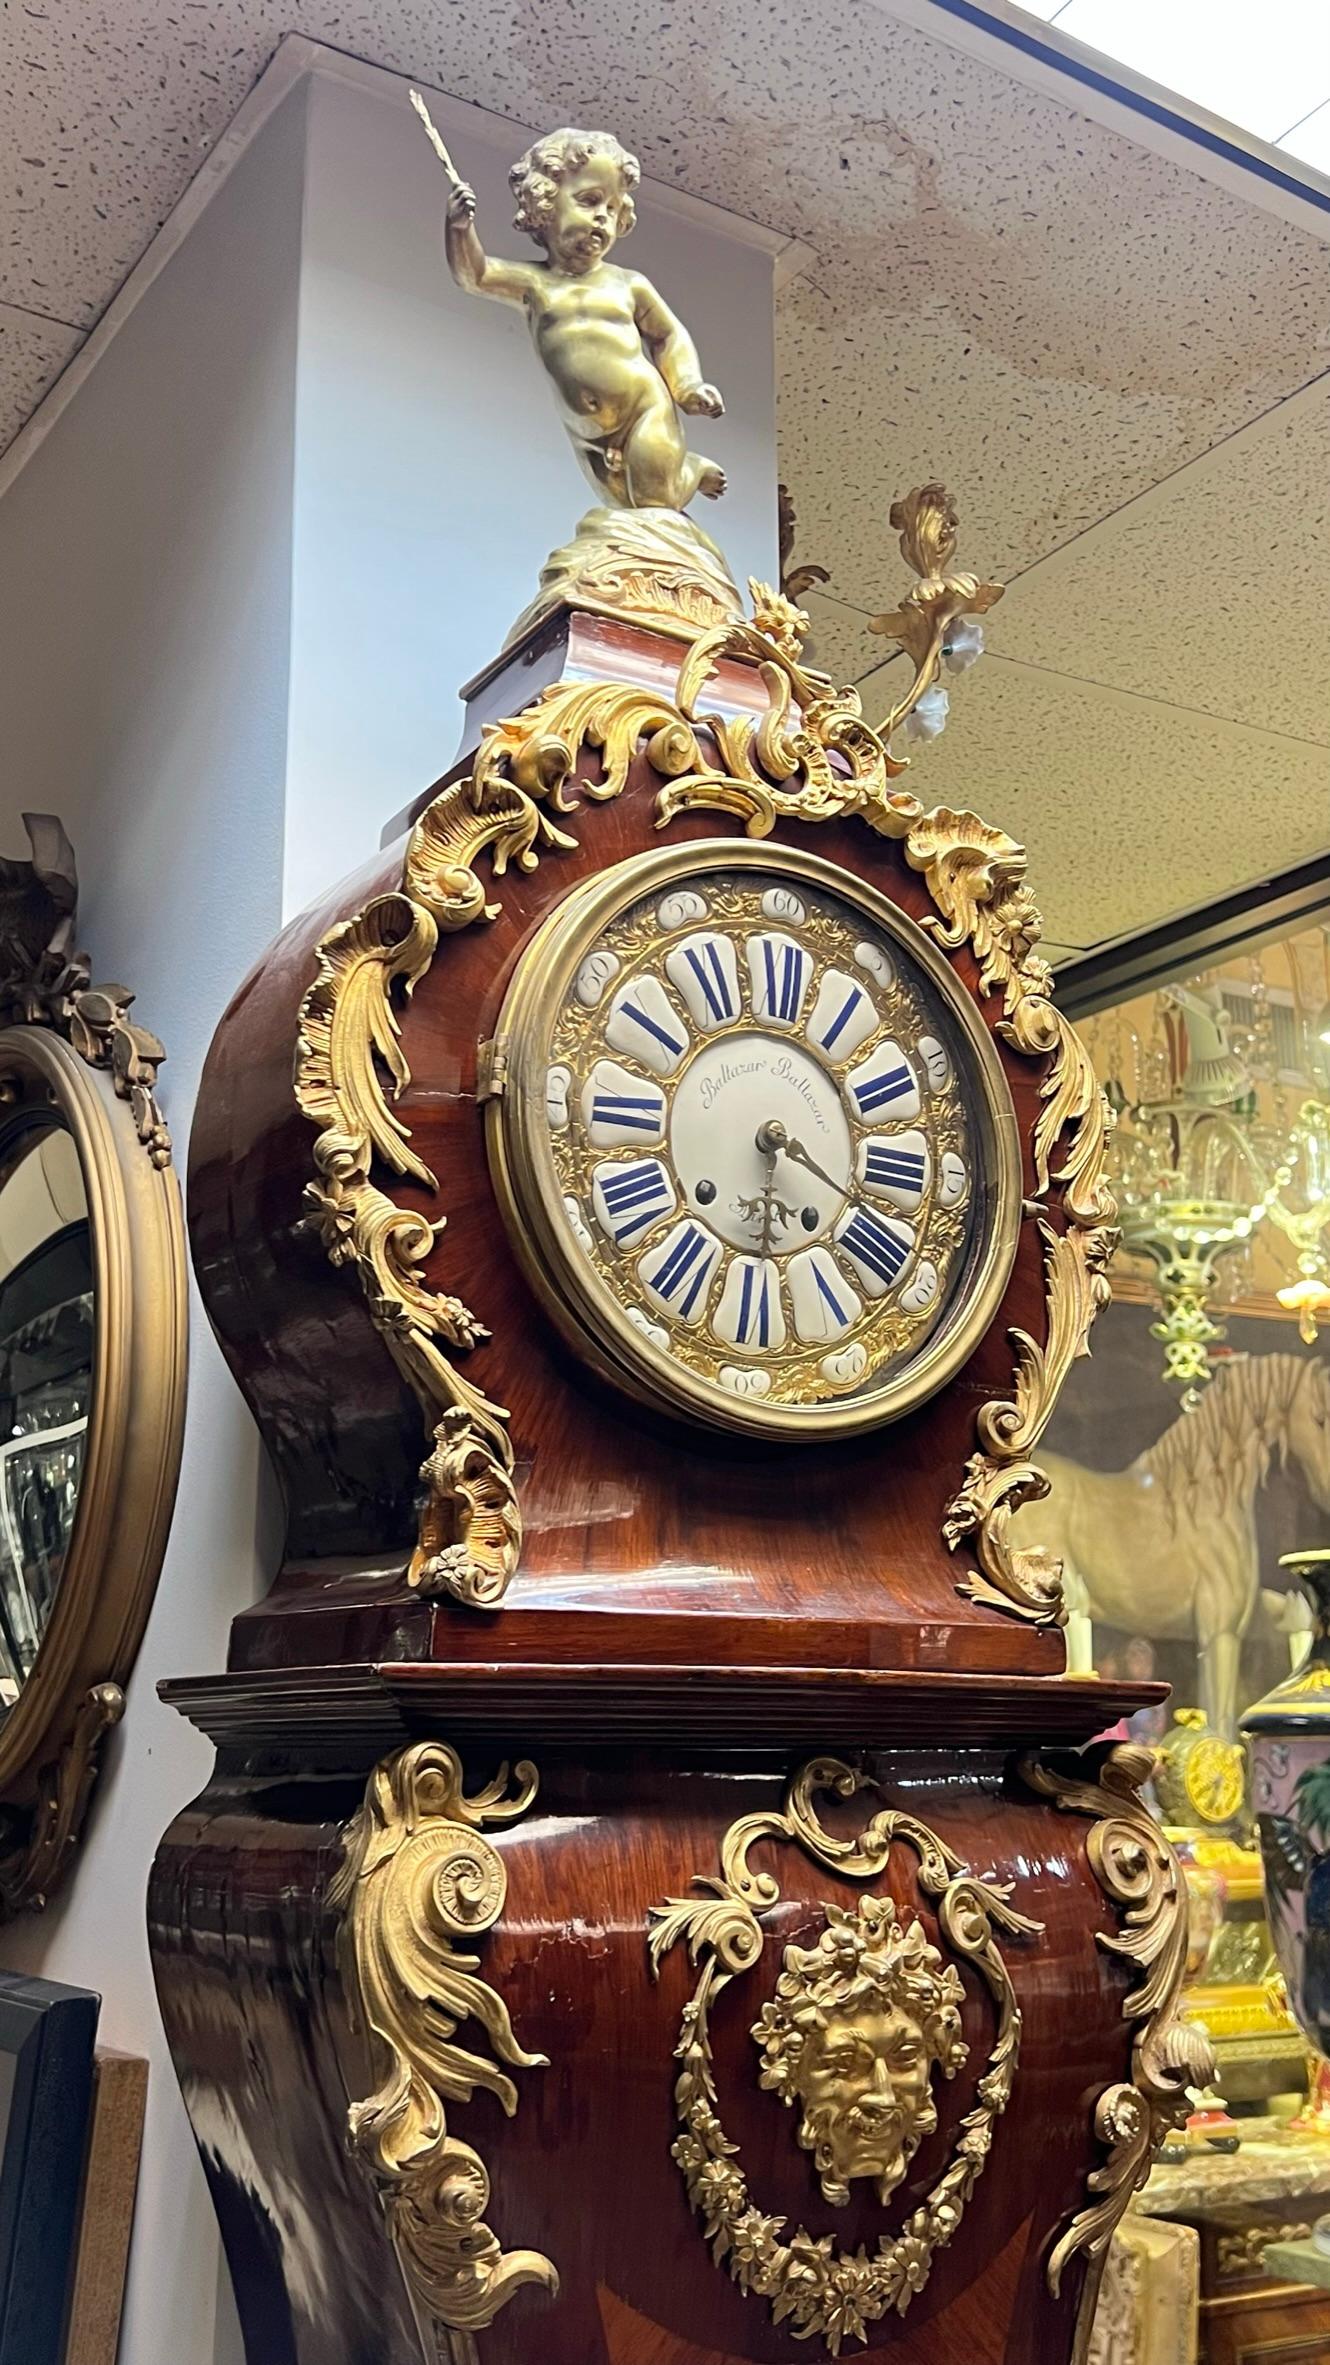 Magnificent late 19th century tall case clock in the French Louis XV style with gilt bronze mounts over case with kingwood veneer after the original model by Charles Cressent (French, 1685-1768), with white porcelain face signed twice Baltazar and 